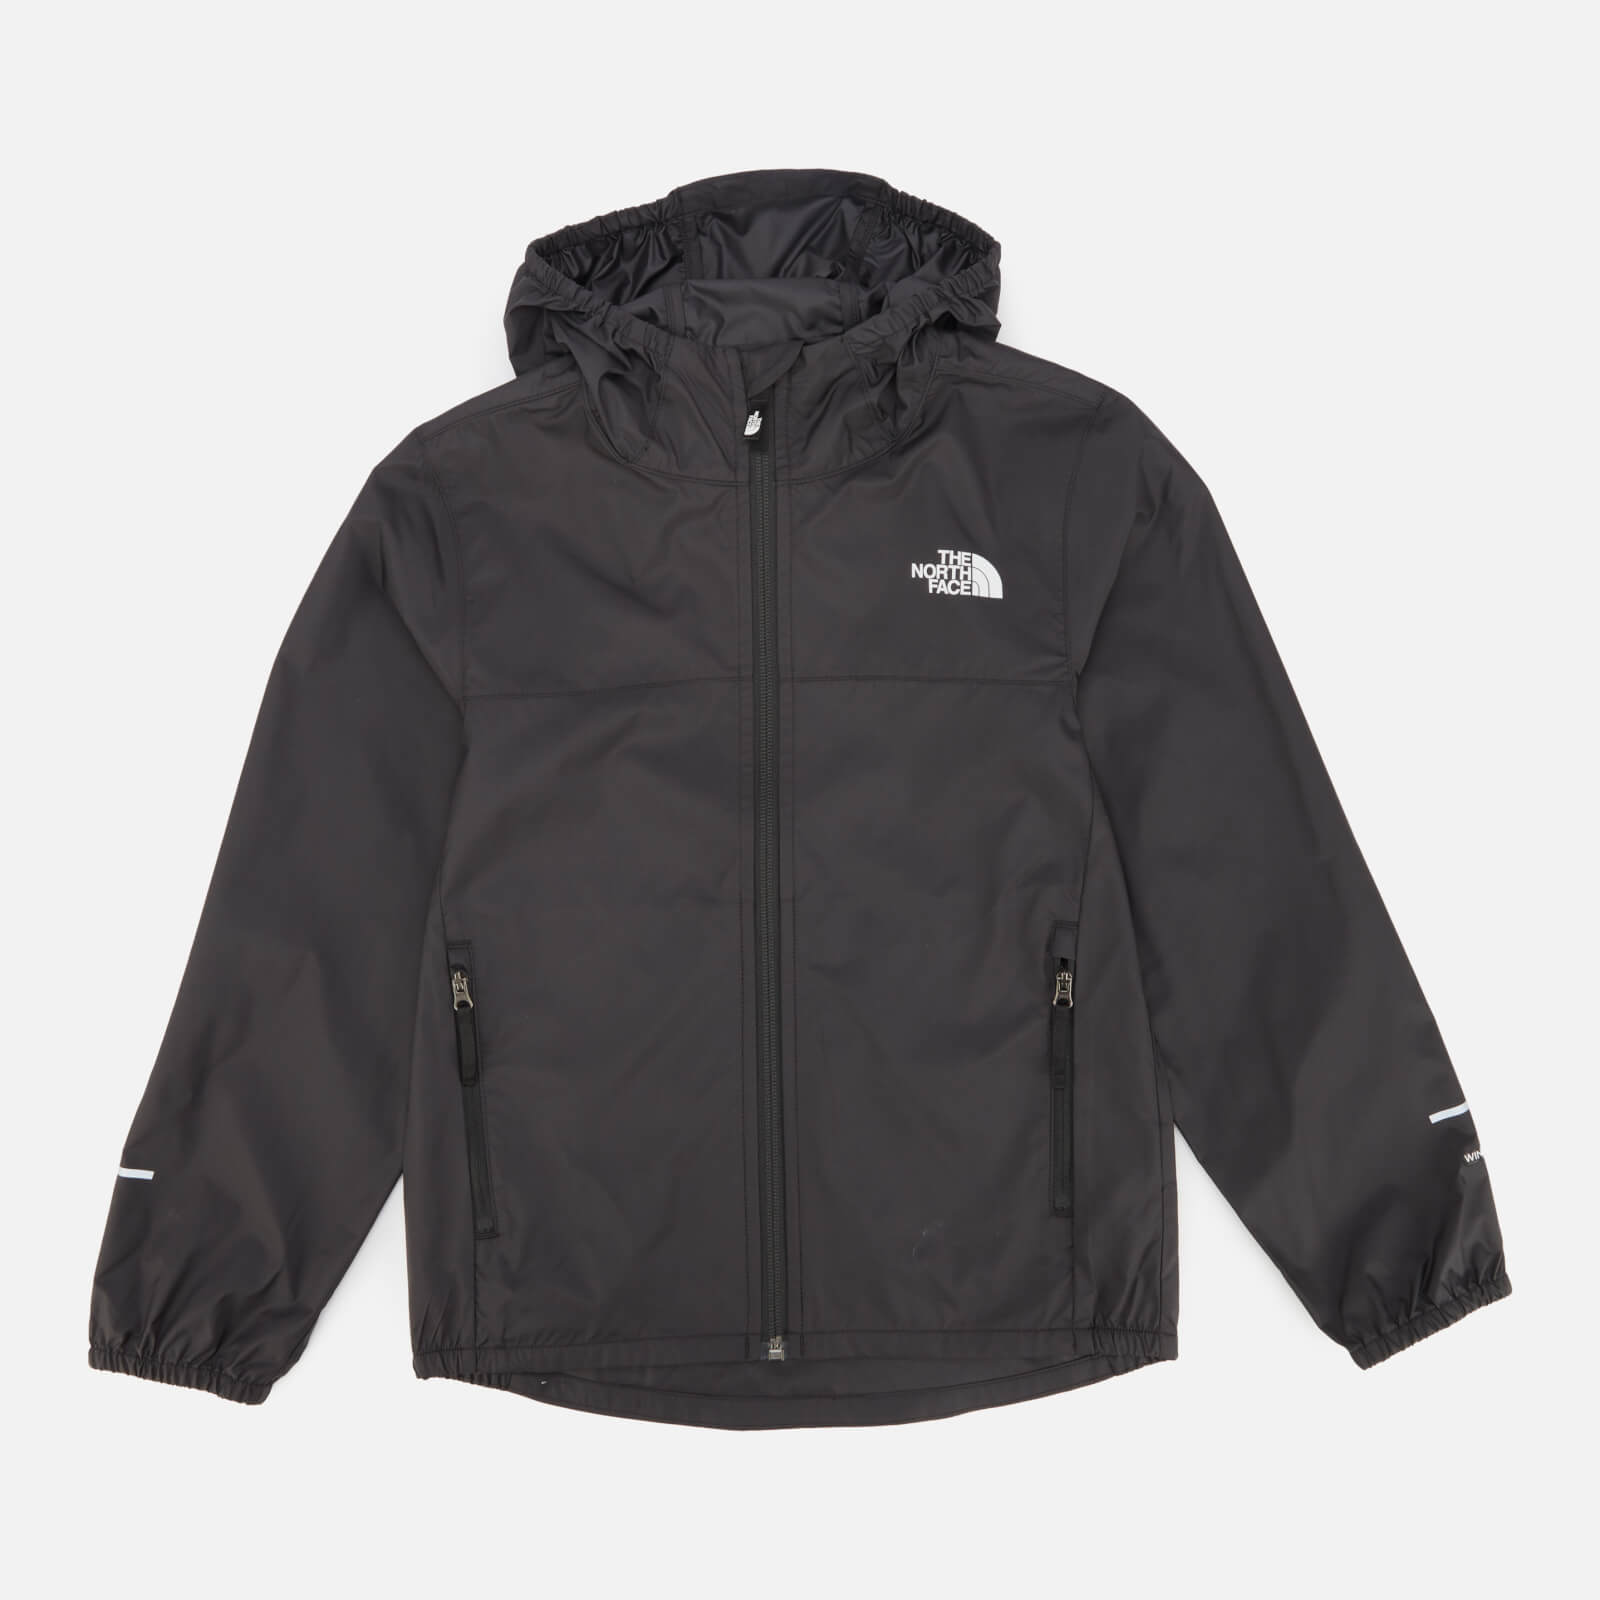 The North Face Boys' Reactor Wind Jacket - Black - 10-12 Years